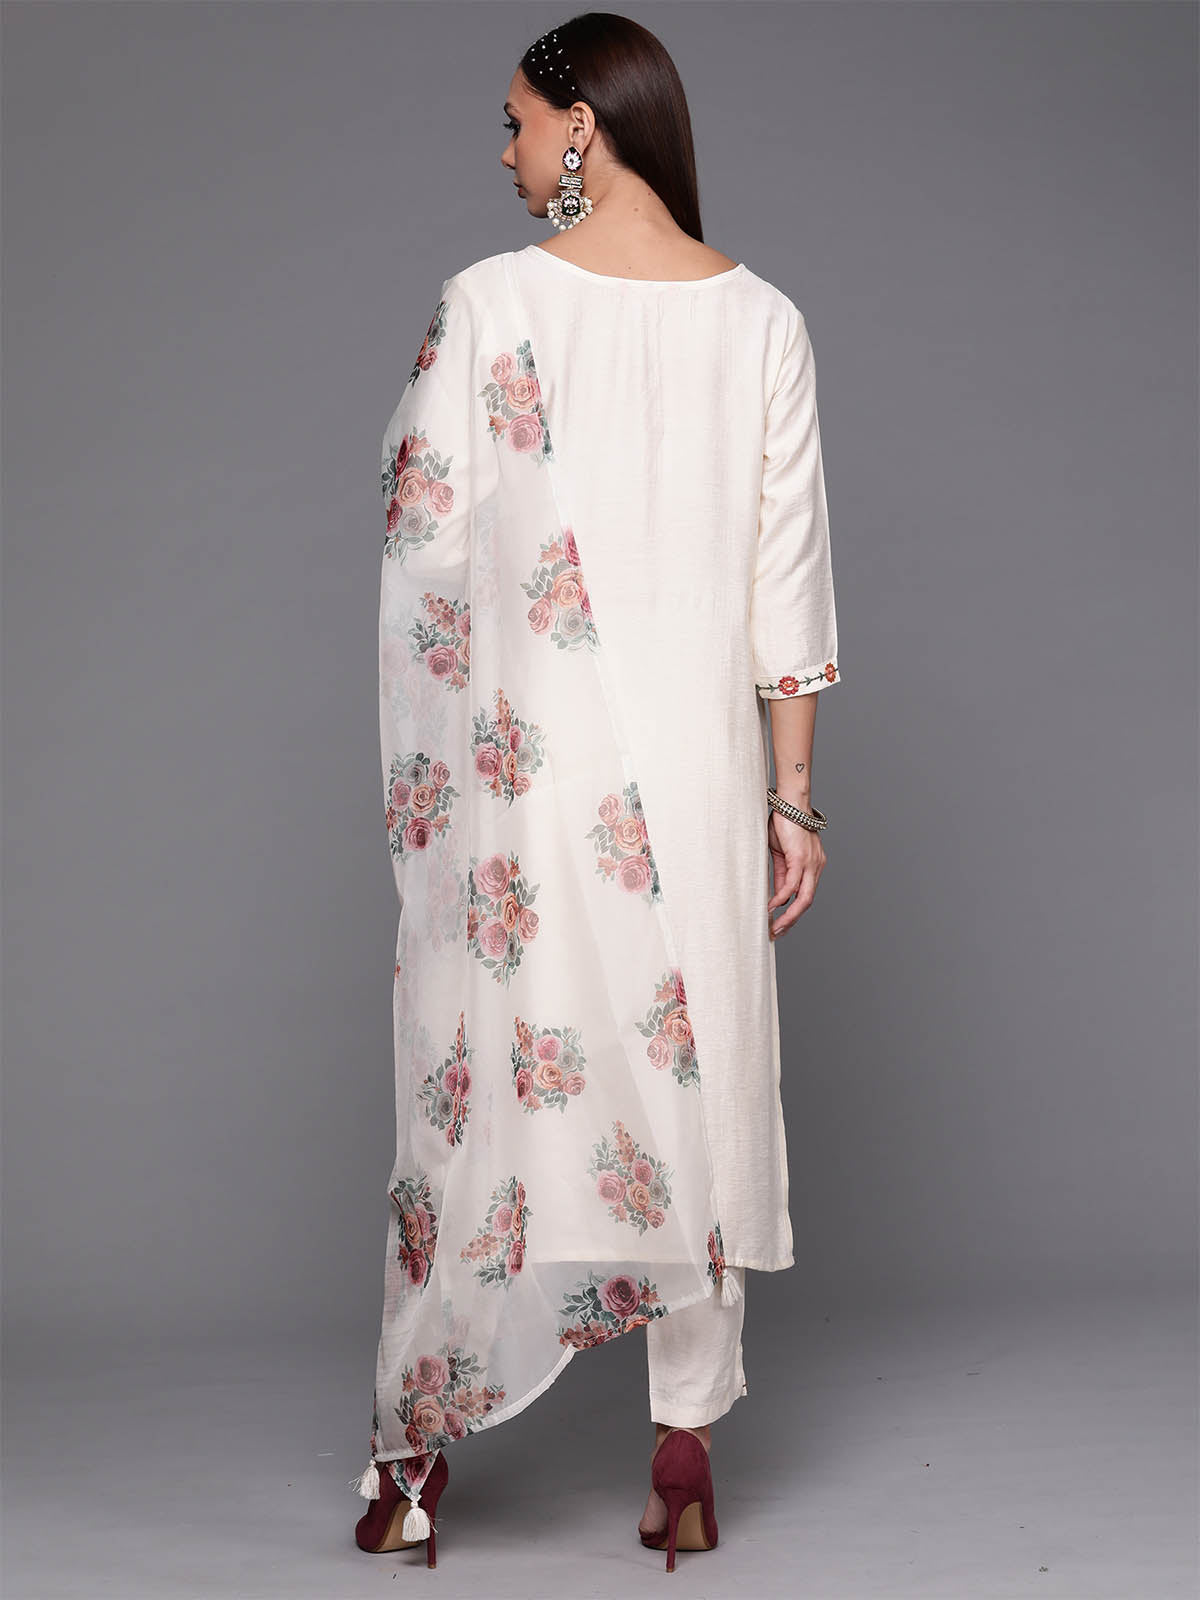 Women's Off White Floral Embroidered Straight Kurta Trouser With Dupatta Set - Odette